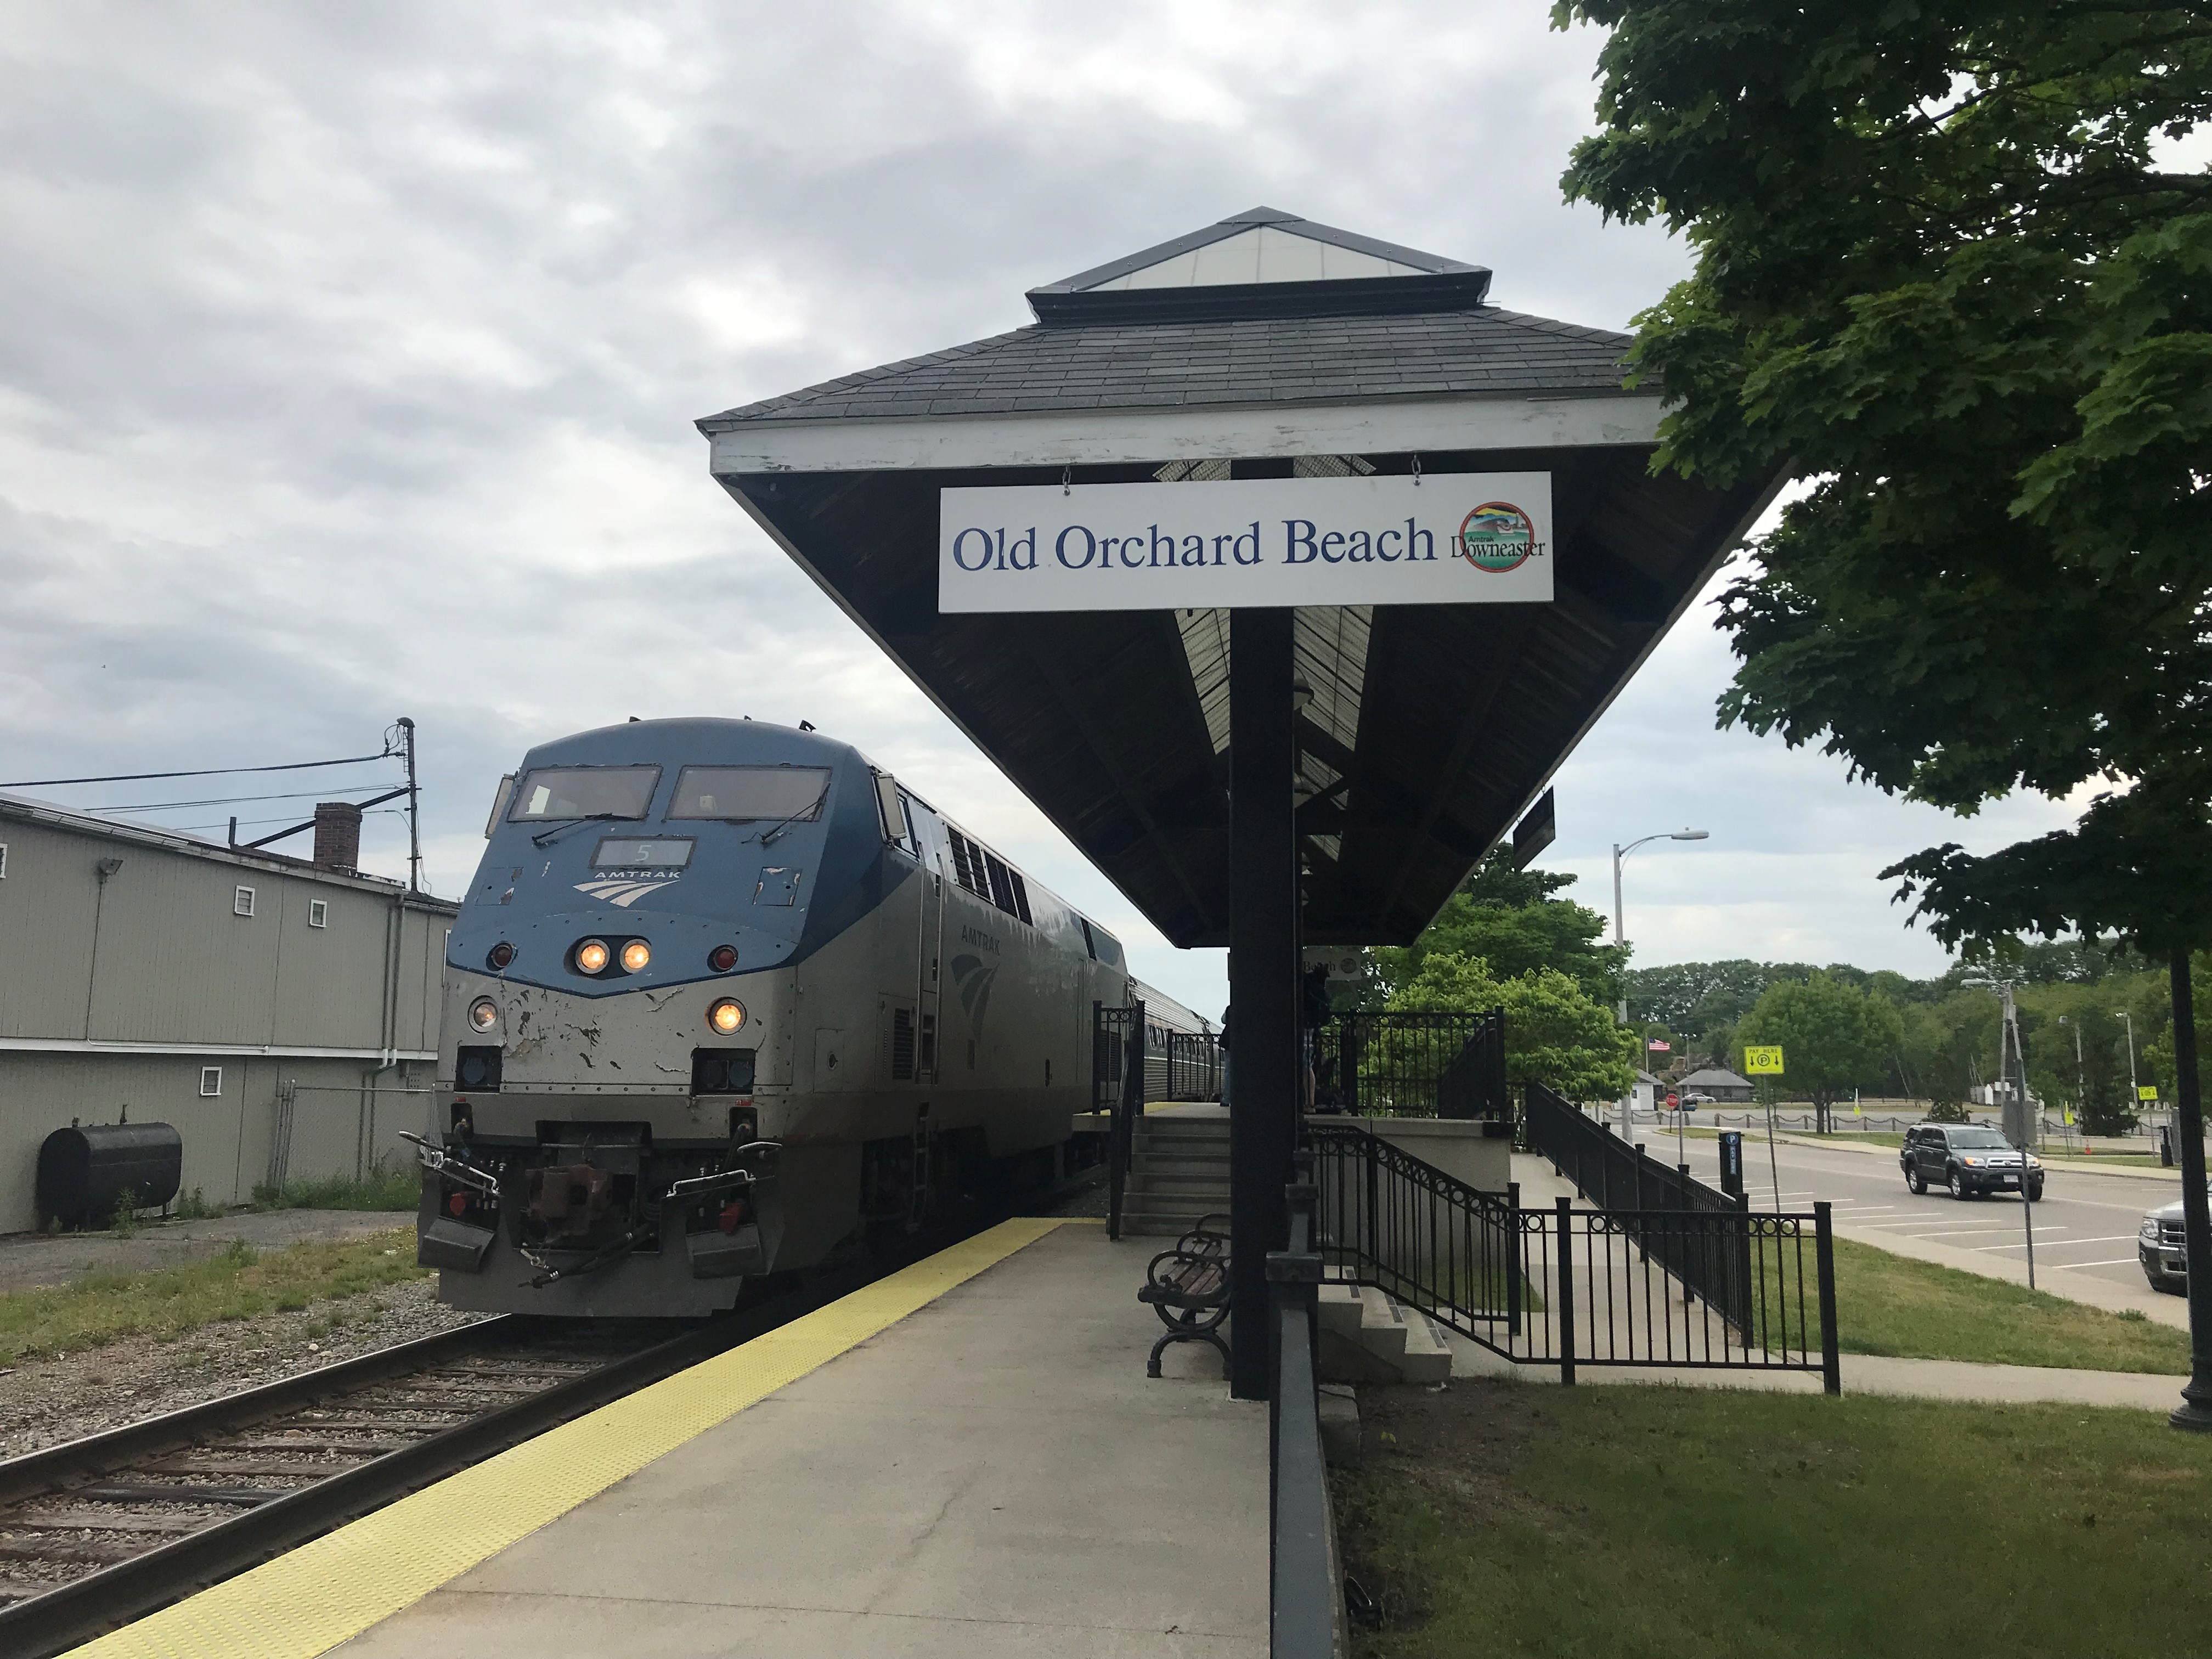 New Hampshire Man Hit, Killed By Amtrak Train in Old Orchard Beach, Maine Police pic